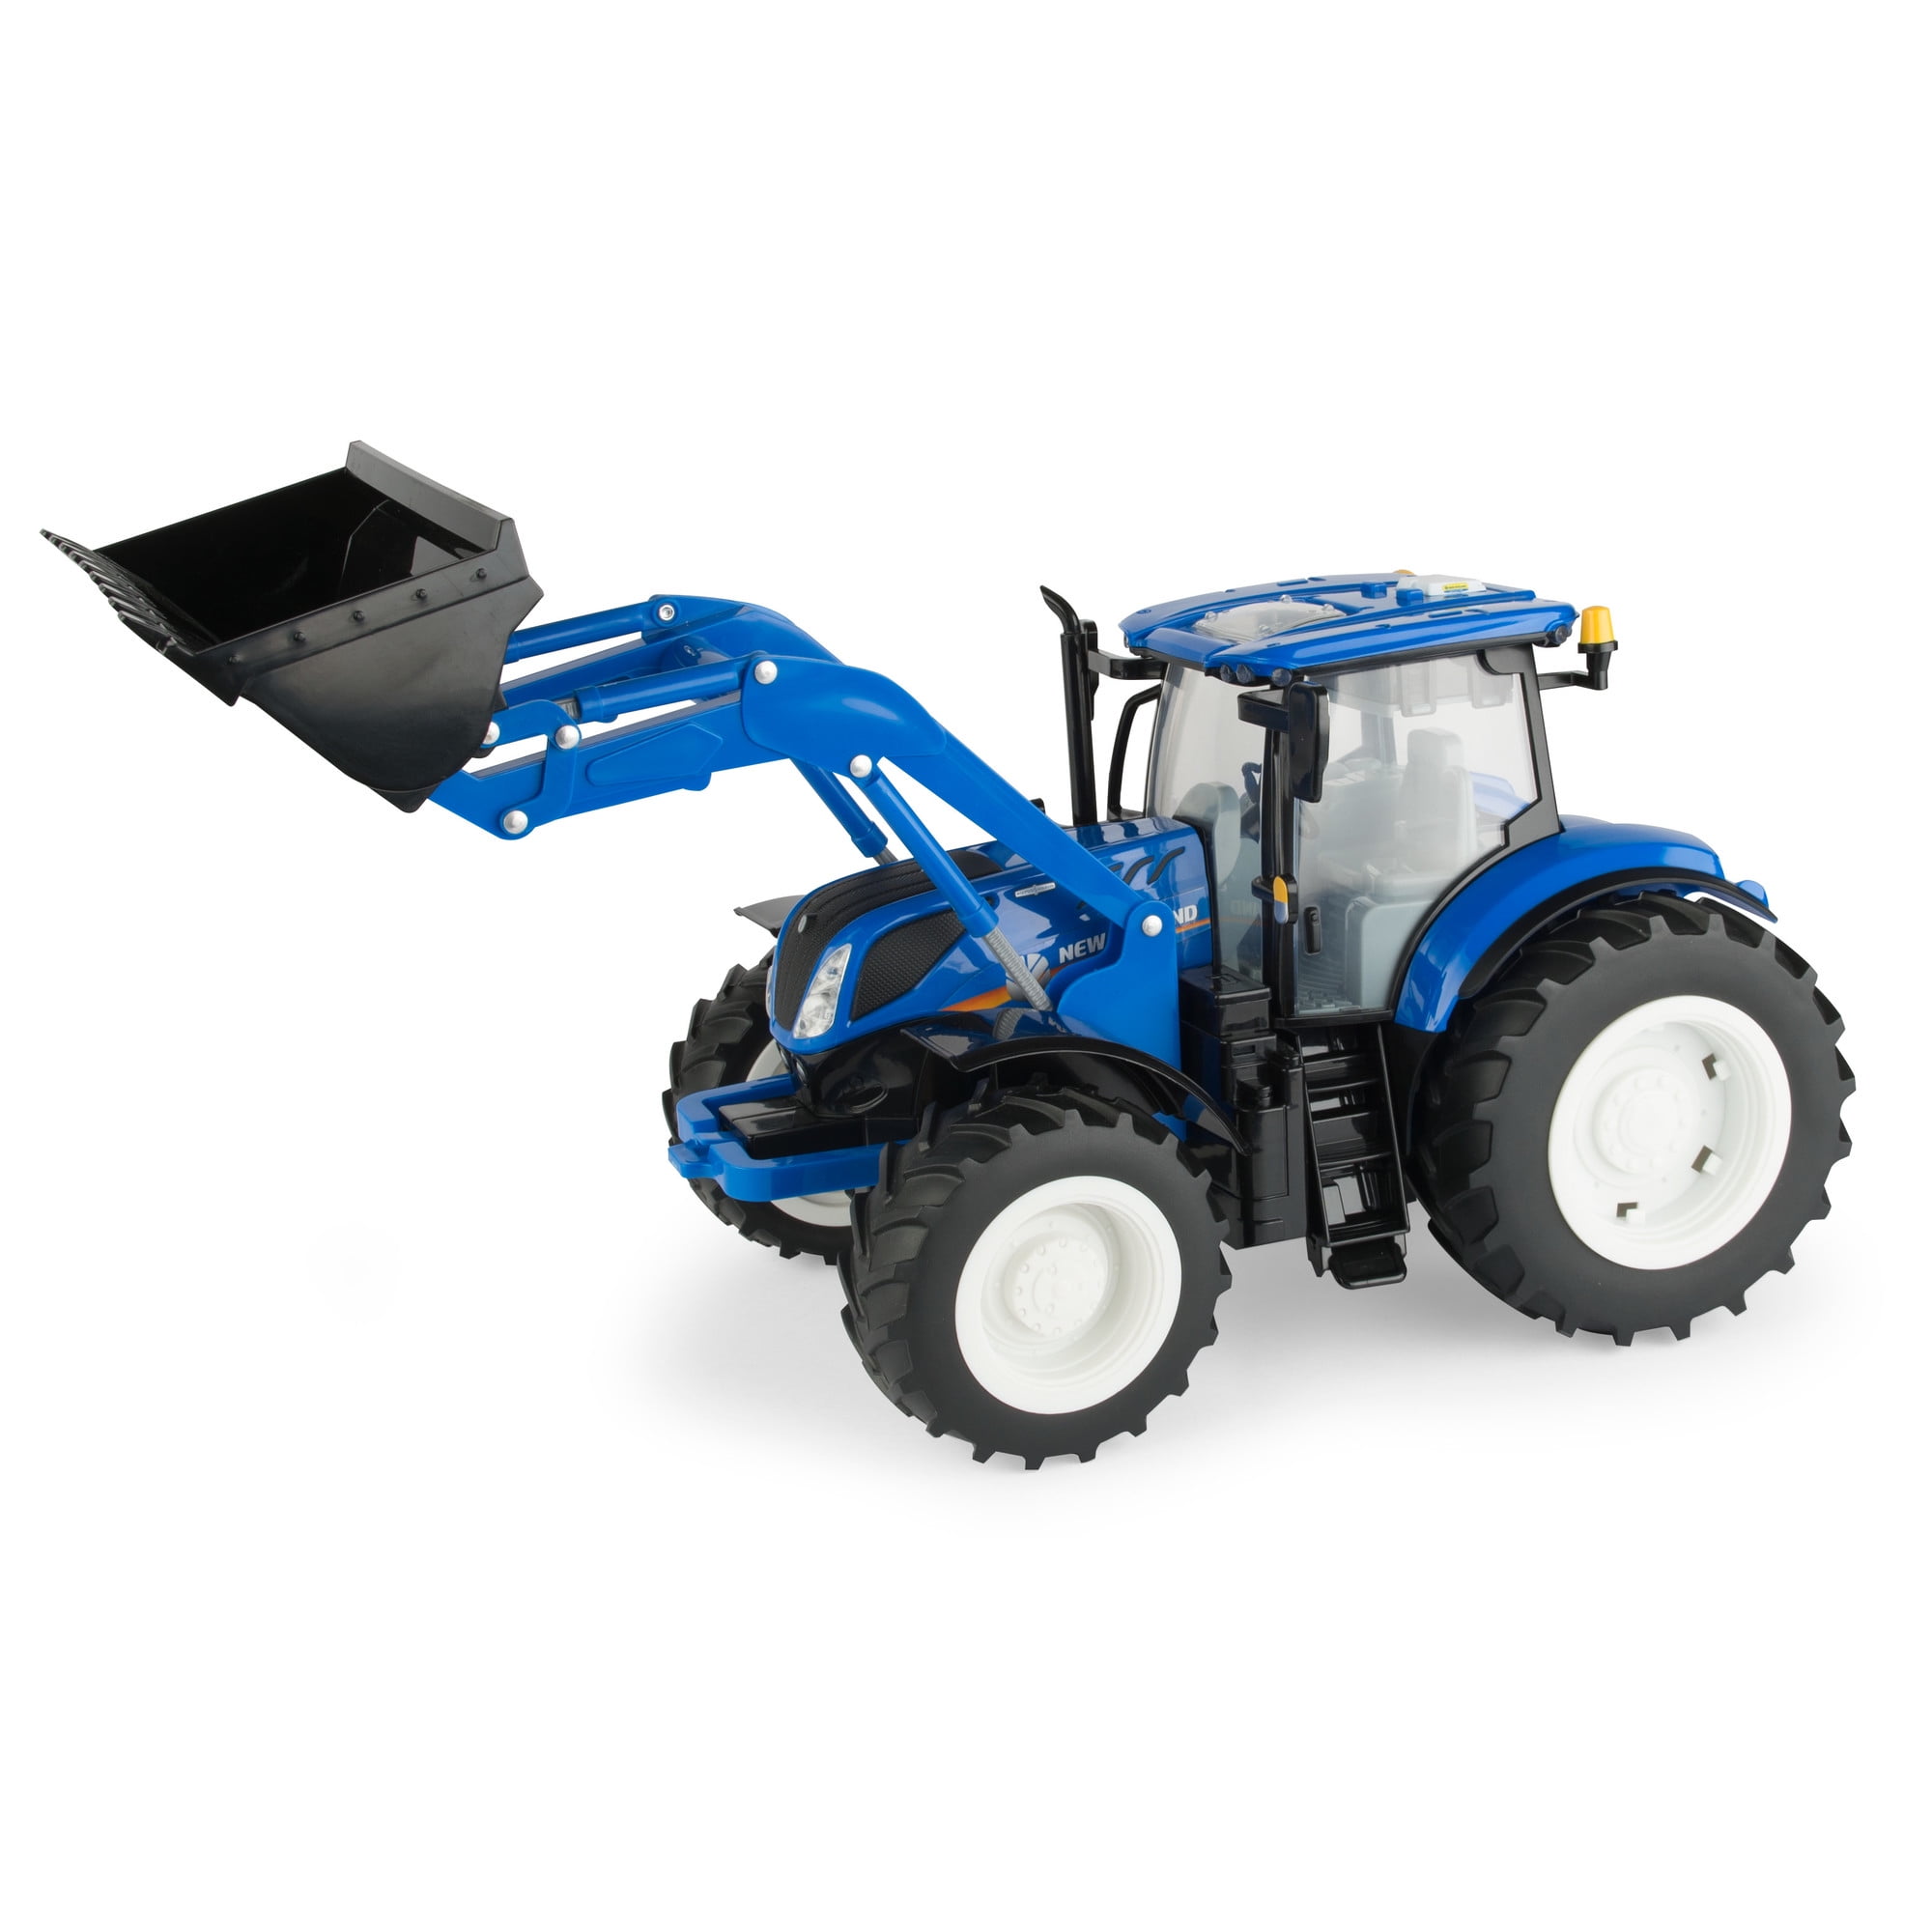 Details about   TRACTOR MODEL 1/16TH SCALE NEW HOLLAND T7.270 'BIG FARM' 1/16th By Brittains 